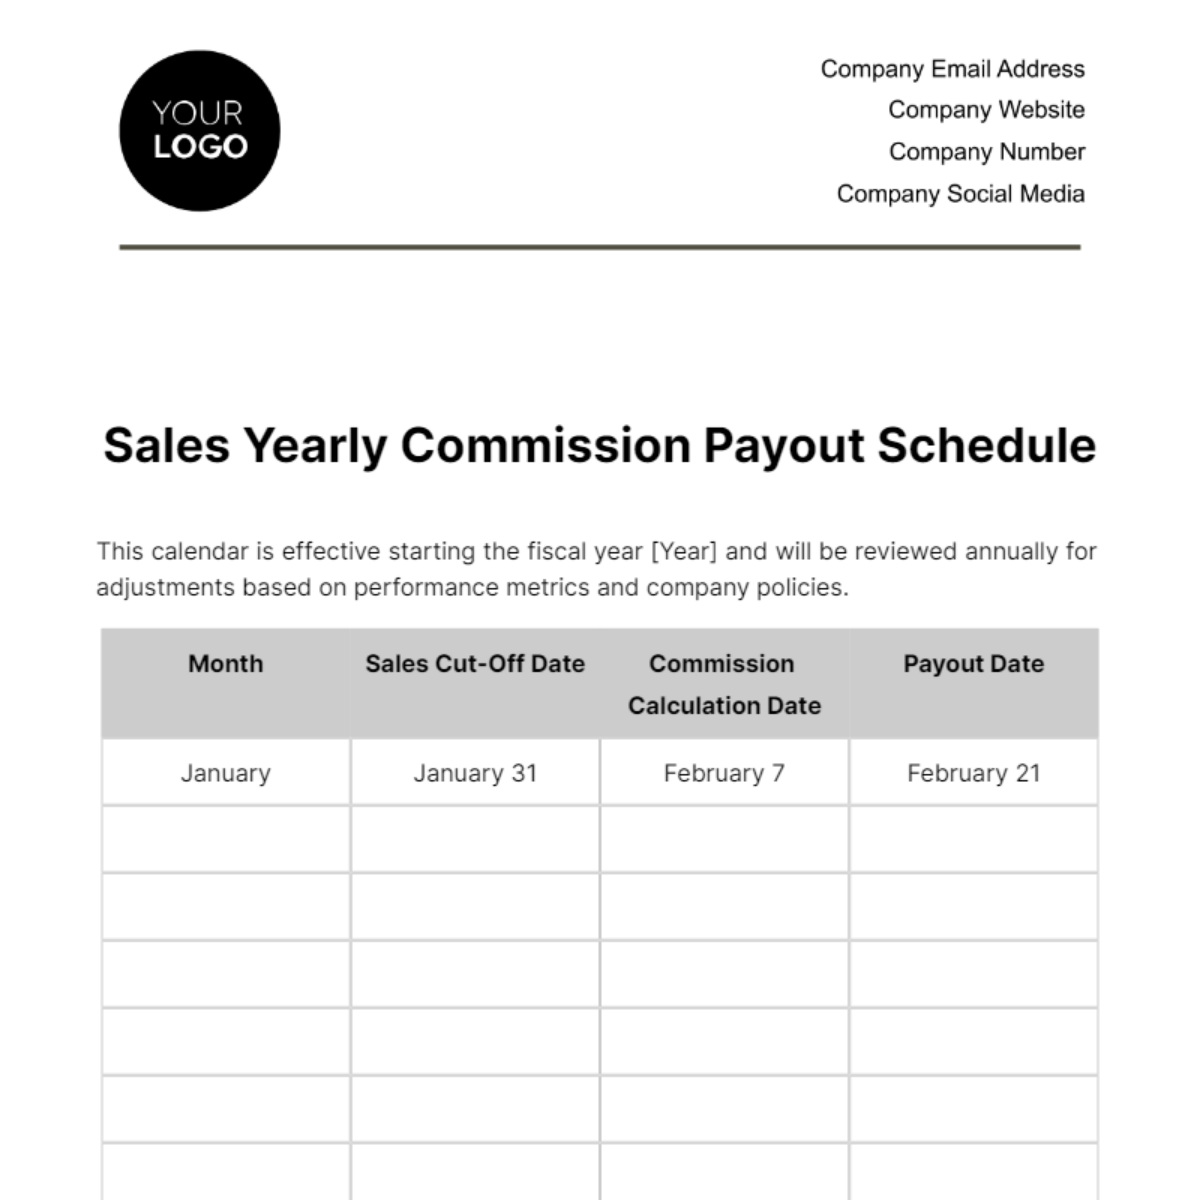 Sales Yearly Commission Payout Schedule Template